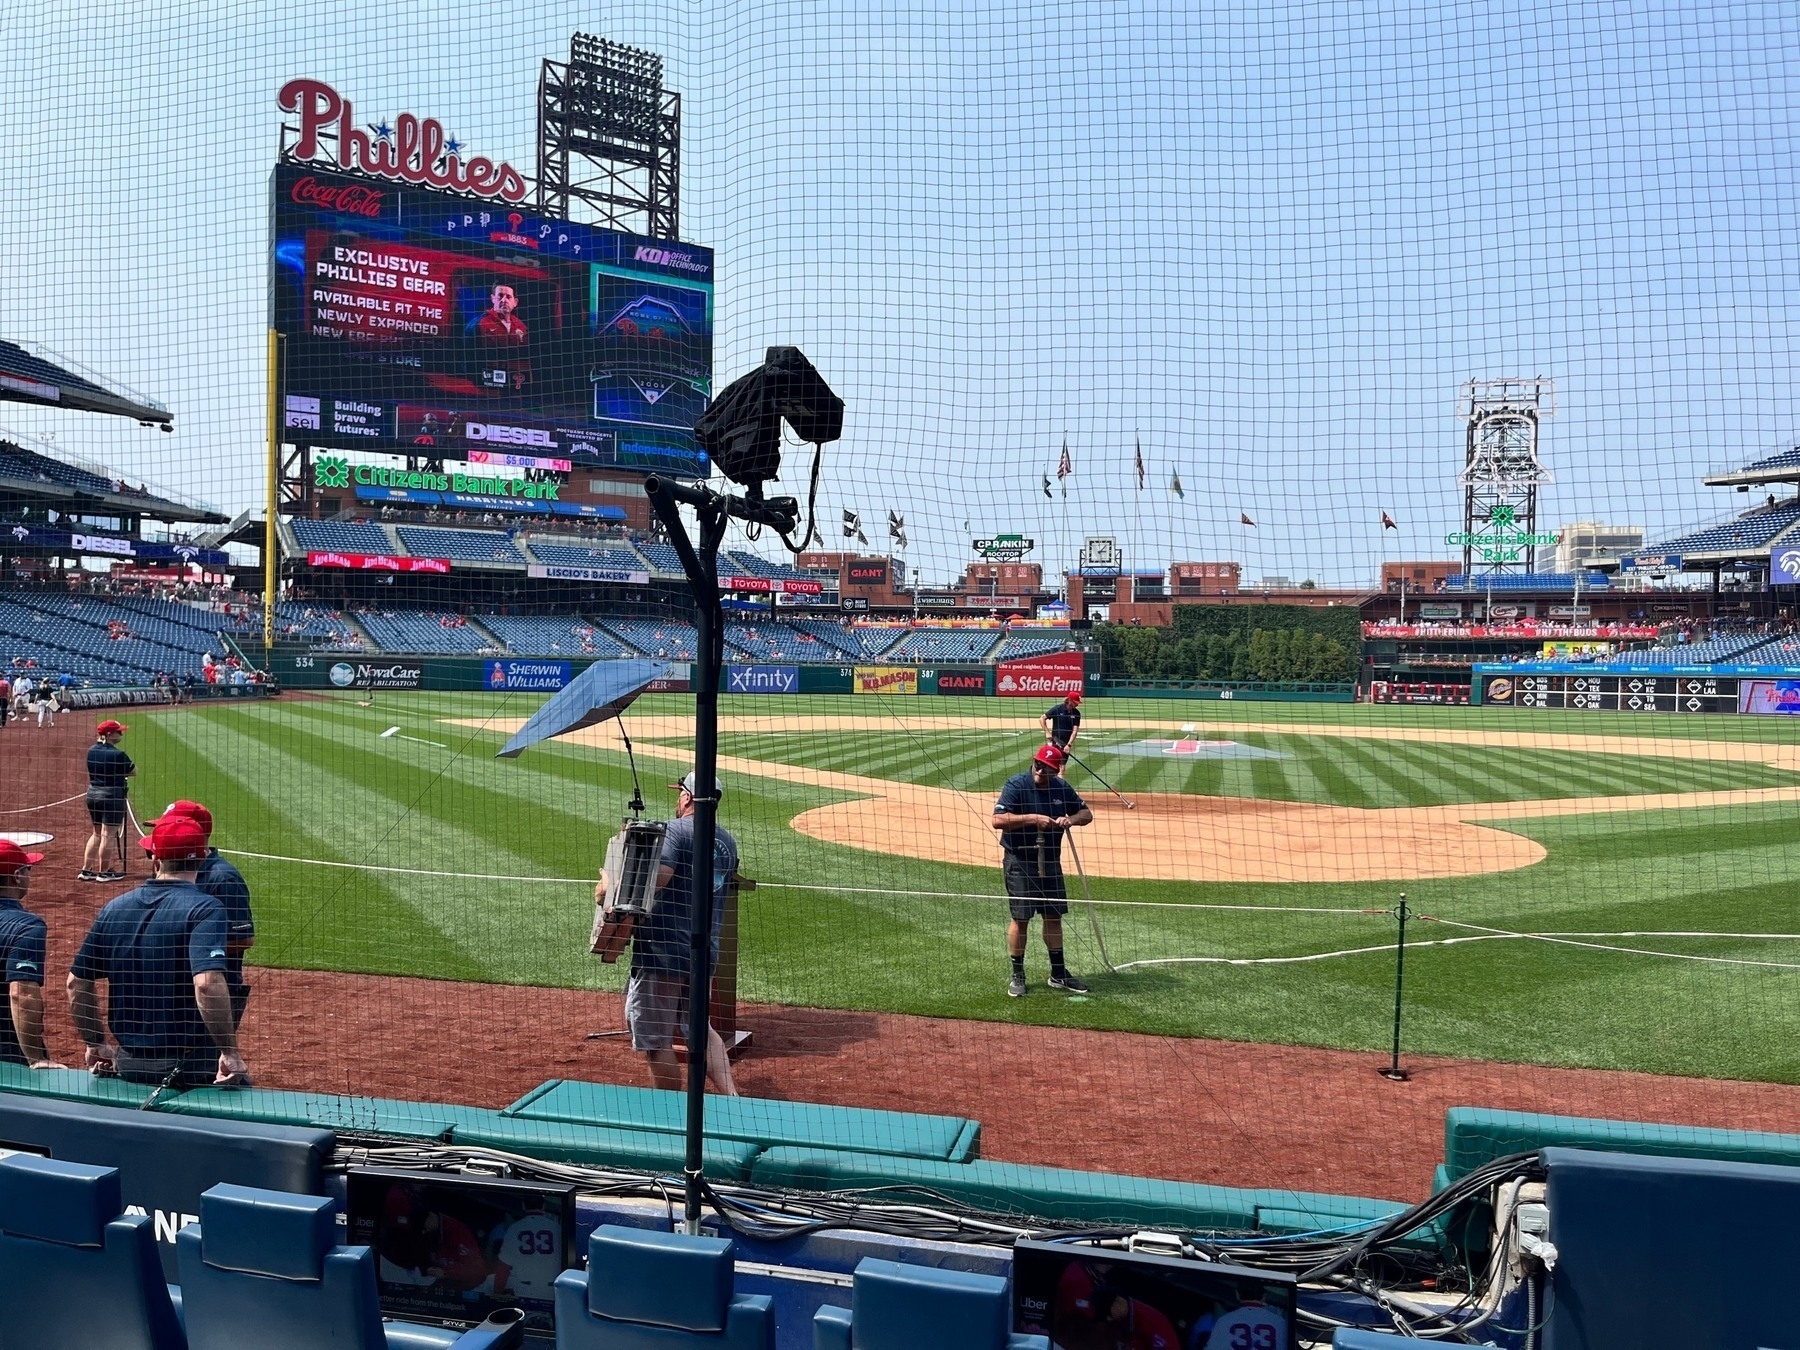 View from my seats at Citizens Bank Park, directly behind home plate